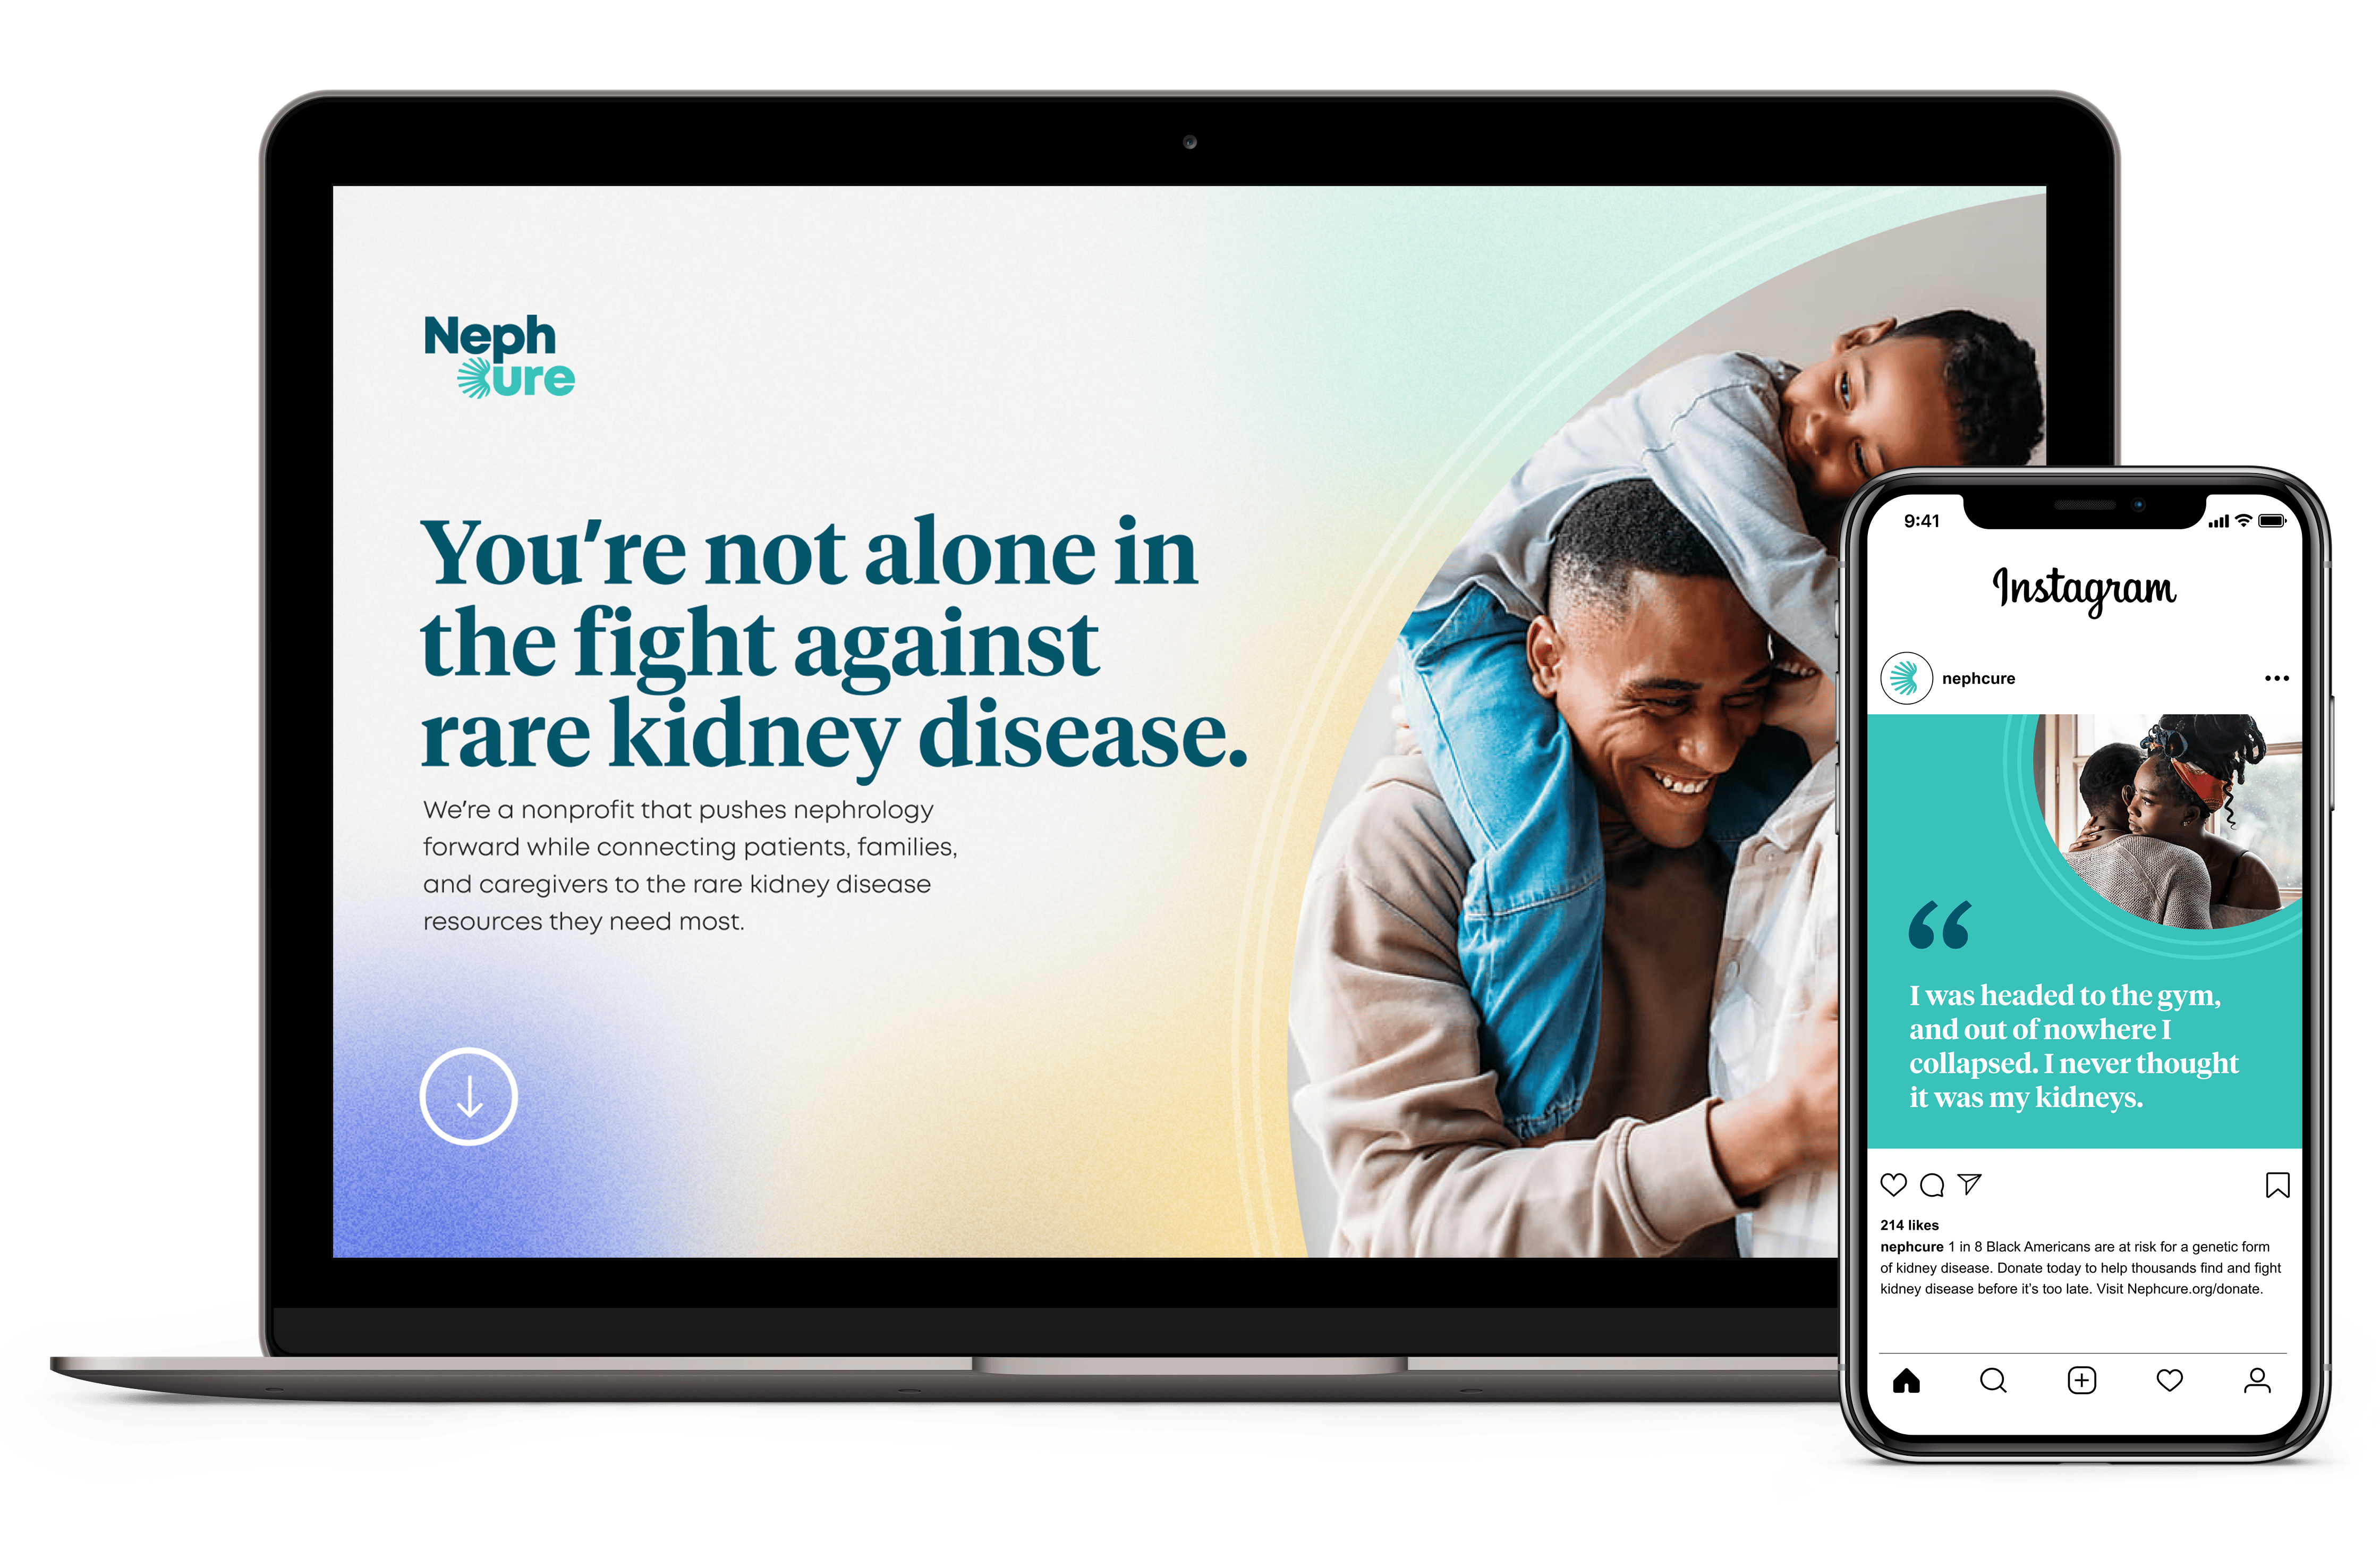 NephCure Push10 responsive web homepage design shown on laptop and mobile screens